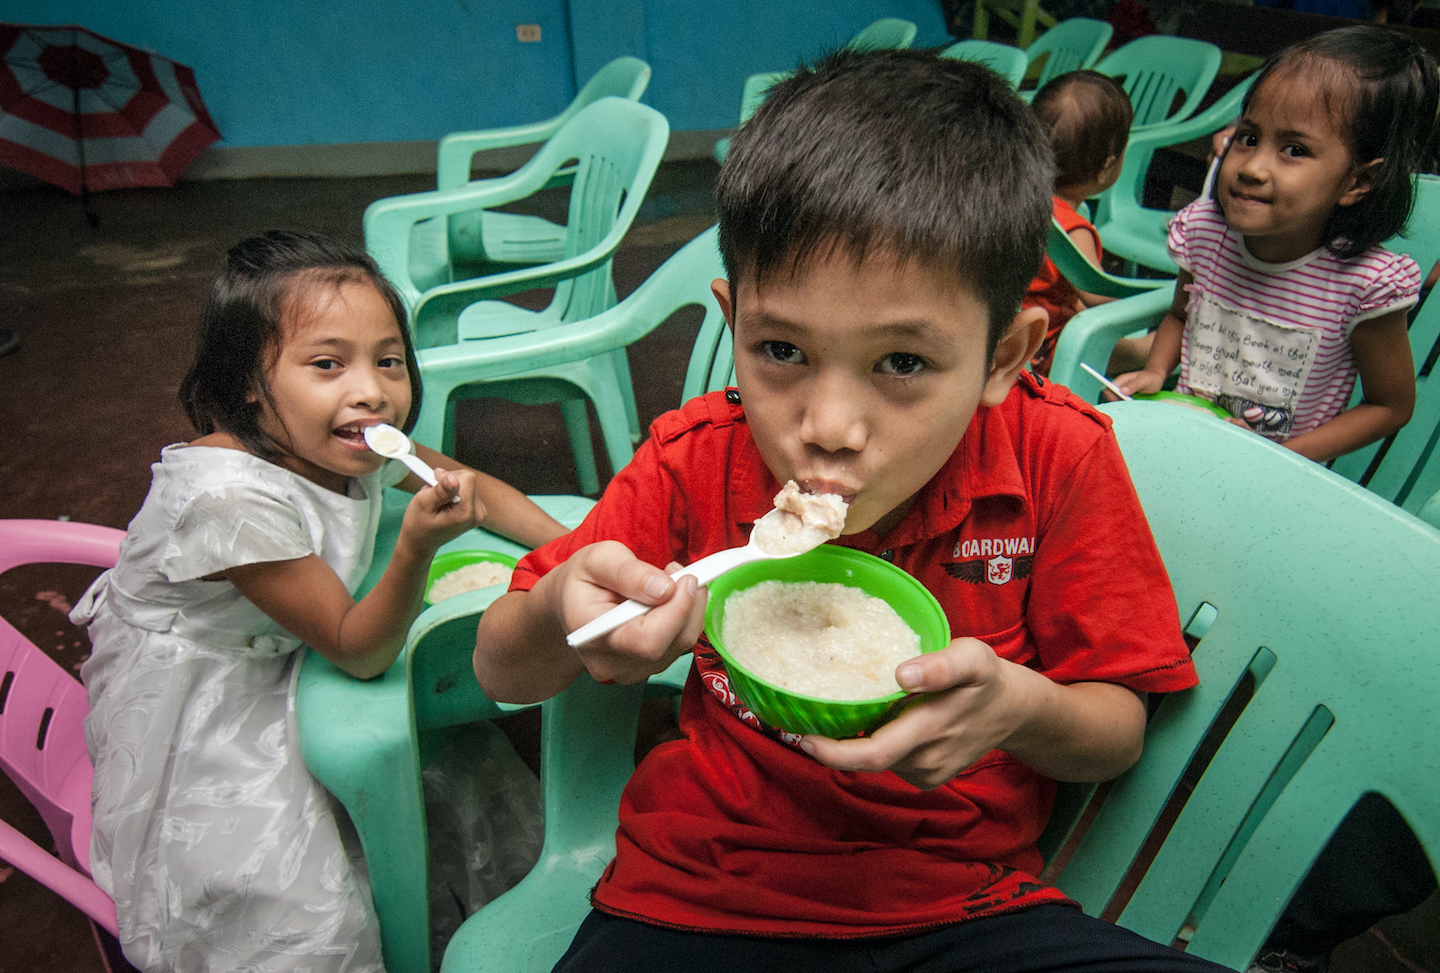 CCI's feeding programmes aim to help children from impoverished families get the proper nutrition they need so that they can learn better in school.